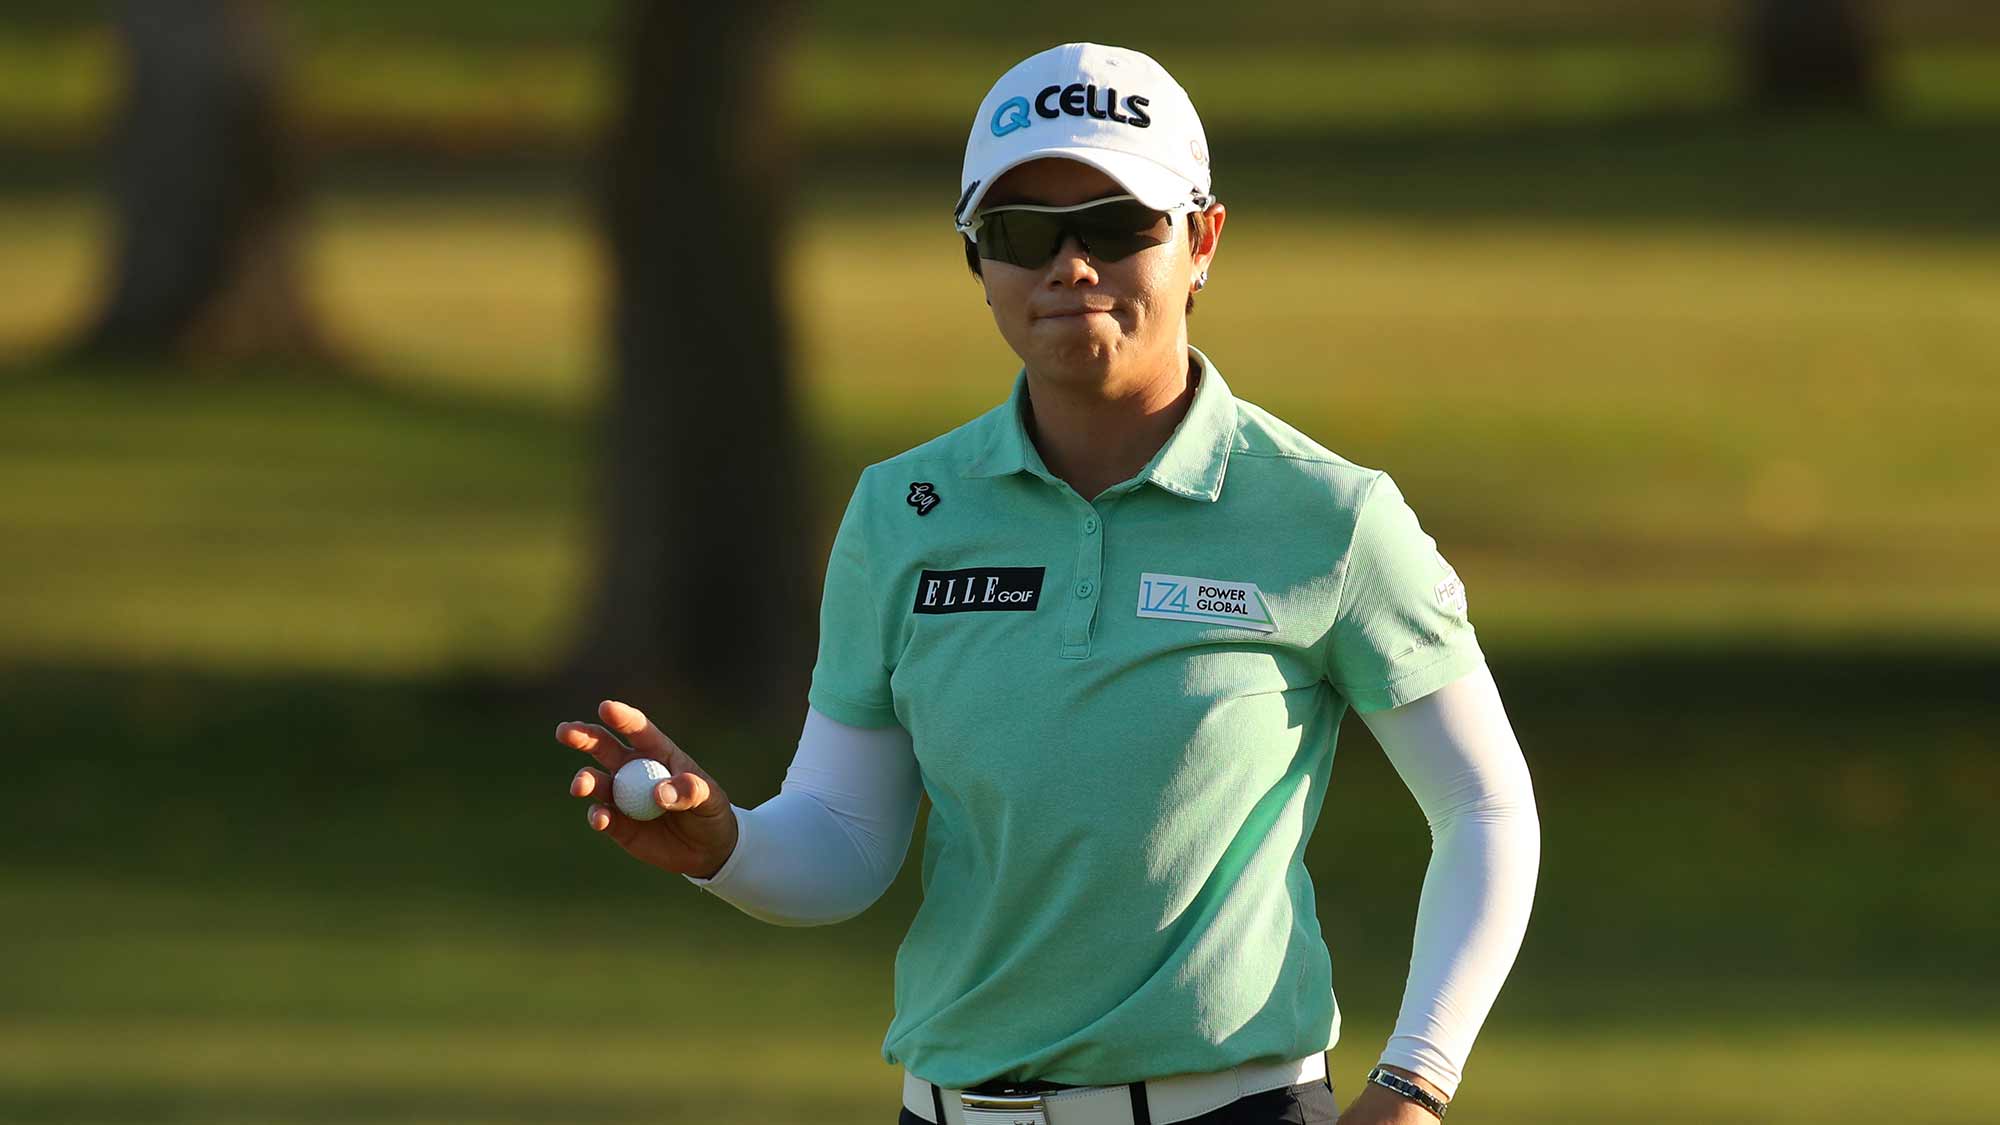 Eun-Hee Ji of South Korea waves to fans after a par on the ninth hole during the second round of the LOTTE Championship on April 19, 2019 in Kapolei, Hawaii